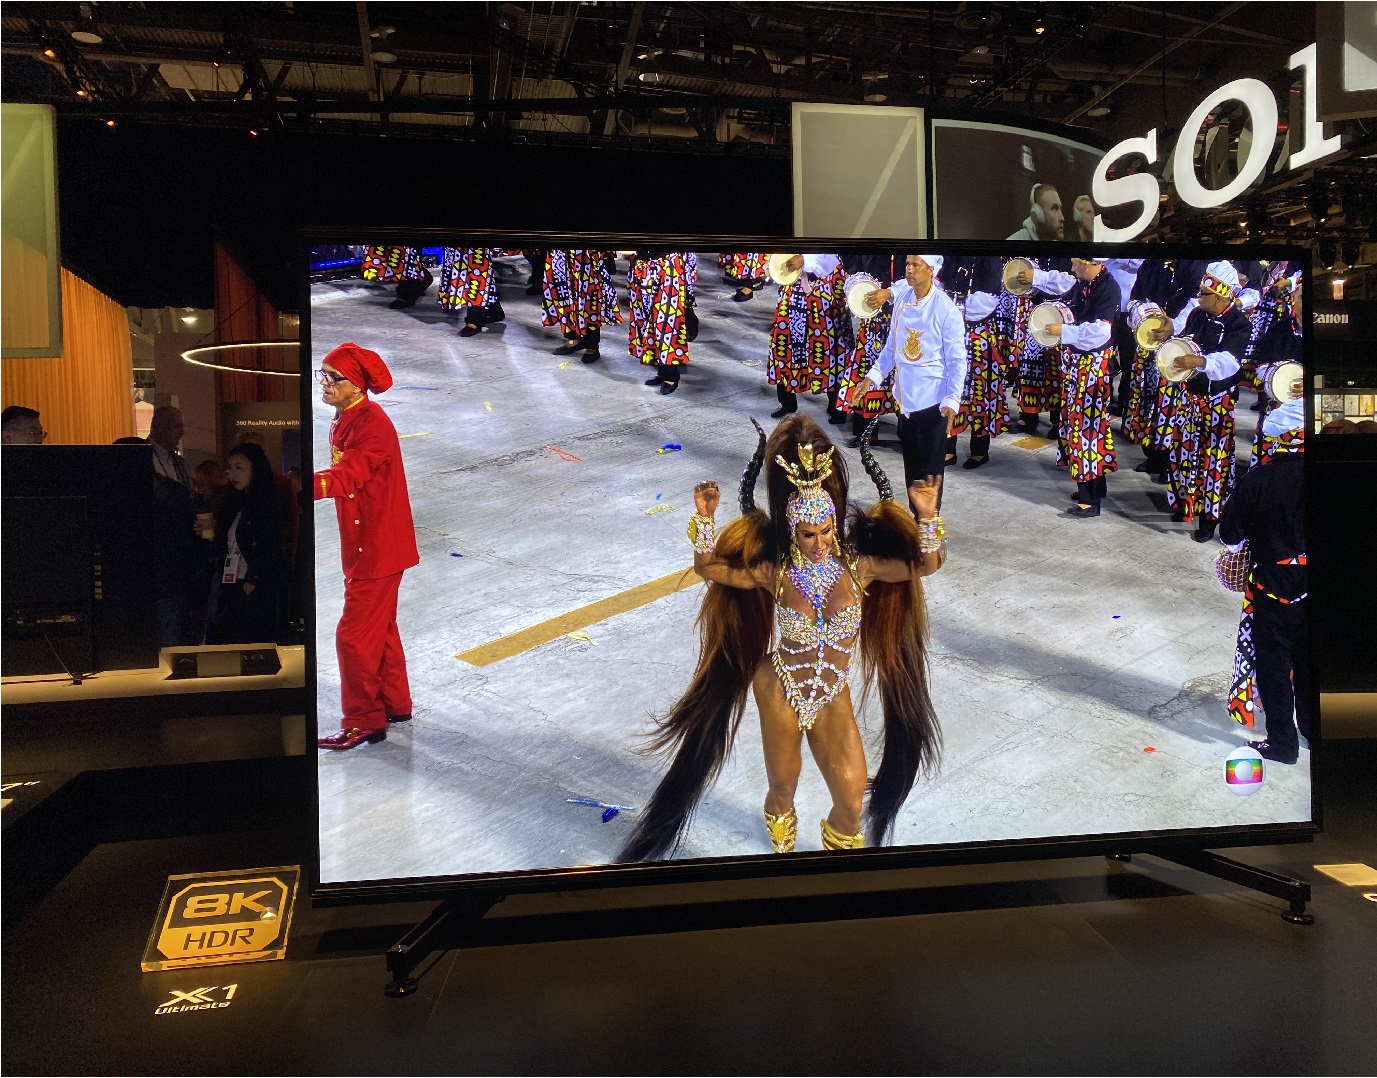 image of the new Sony Z8H TV model